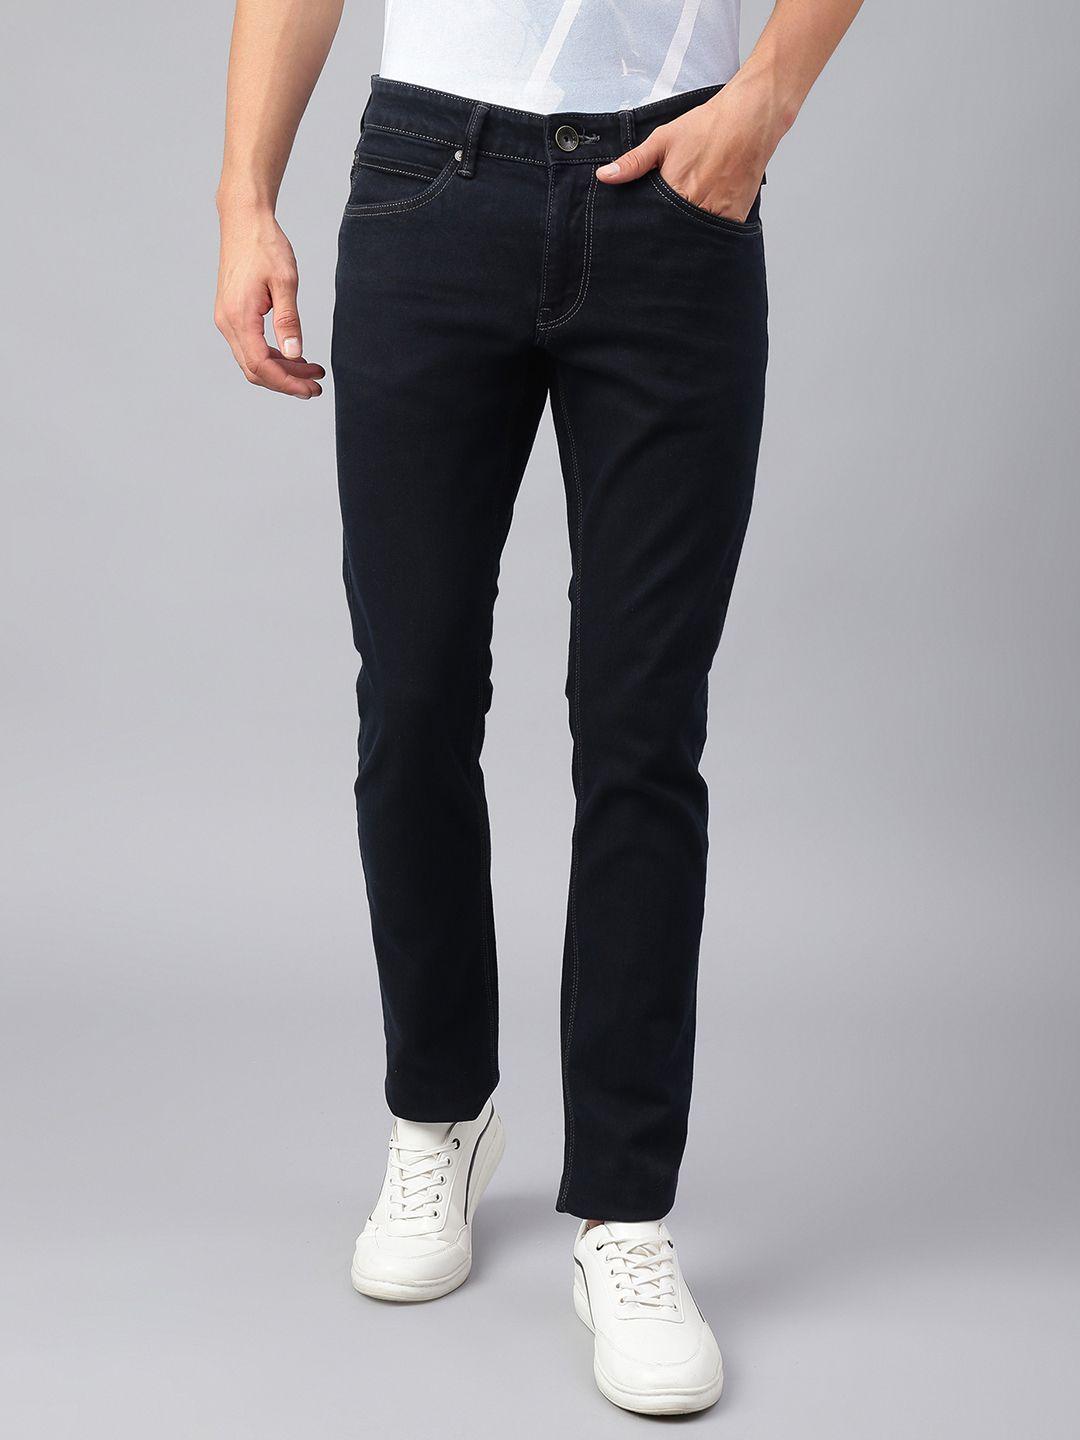 beverly hills polo club men skinny fit jeans